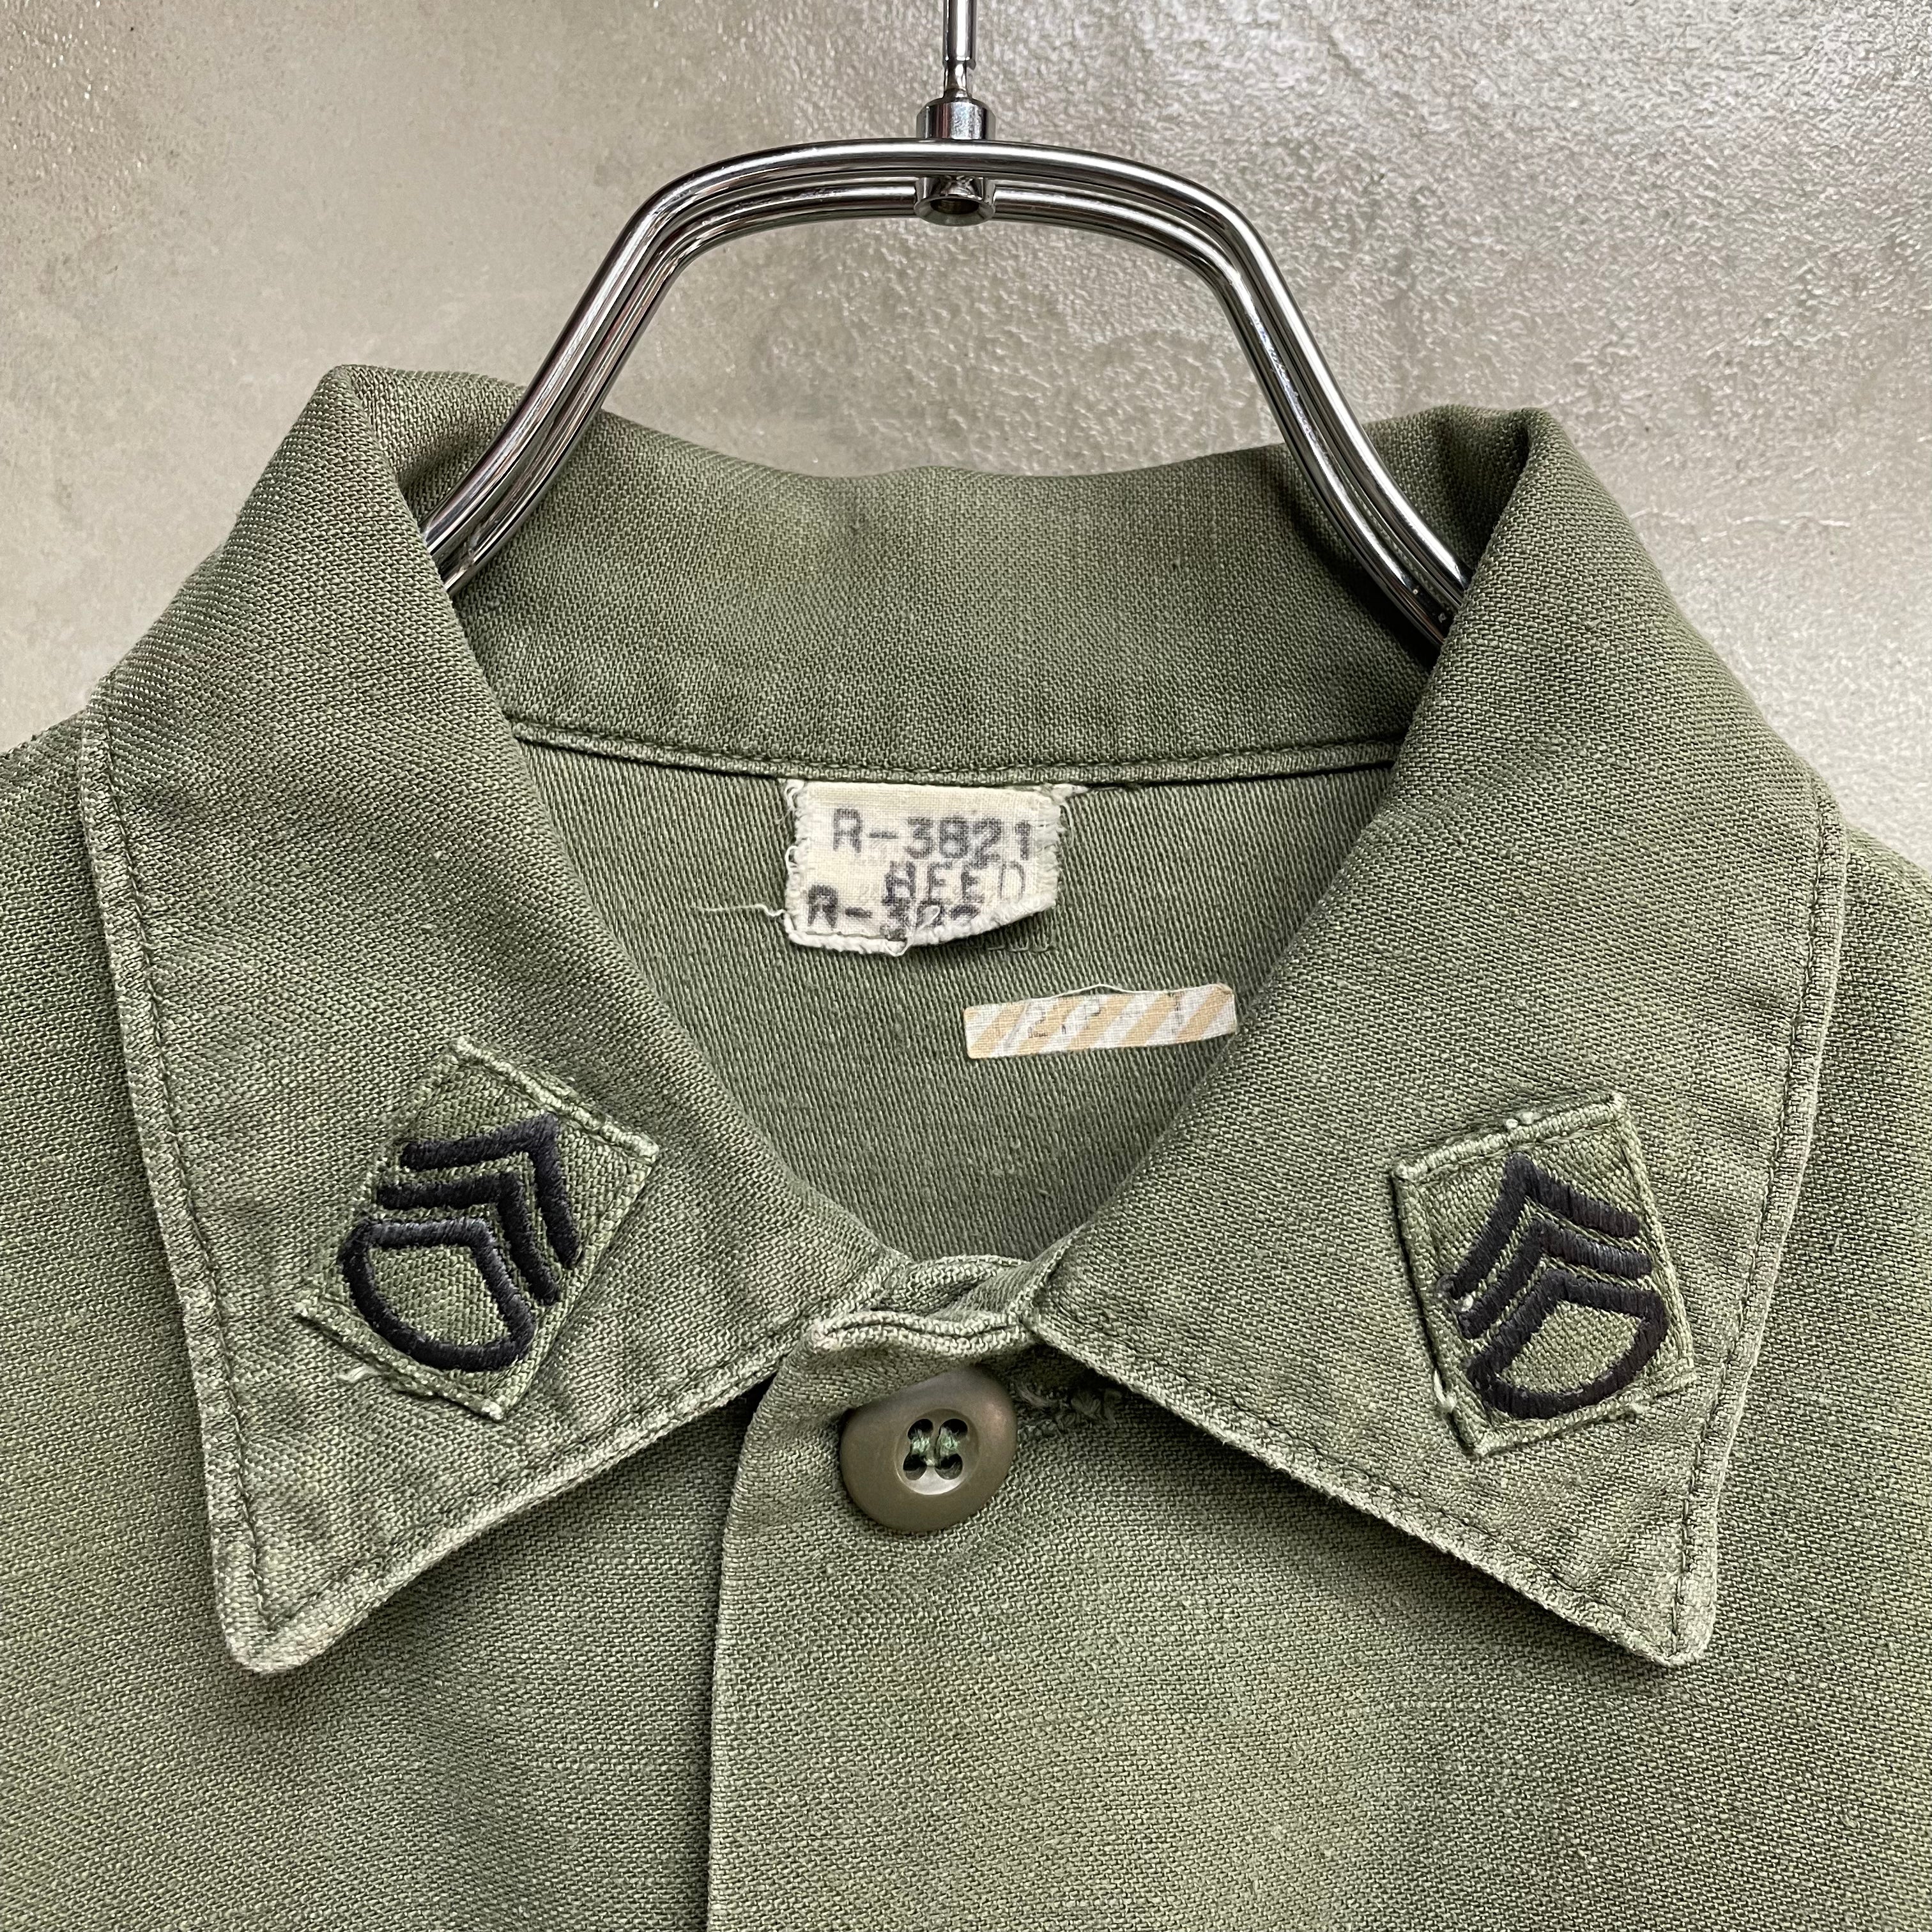 [ ONLY ONE ! ] US ARMED FORCES '73 UTILITY SHIRT / Mr.Clean Select